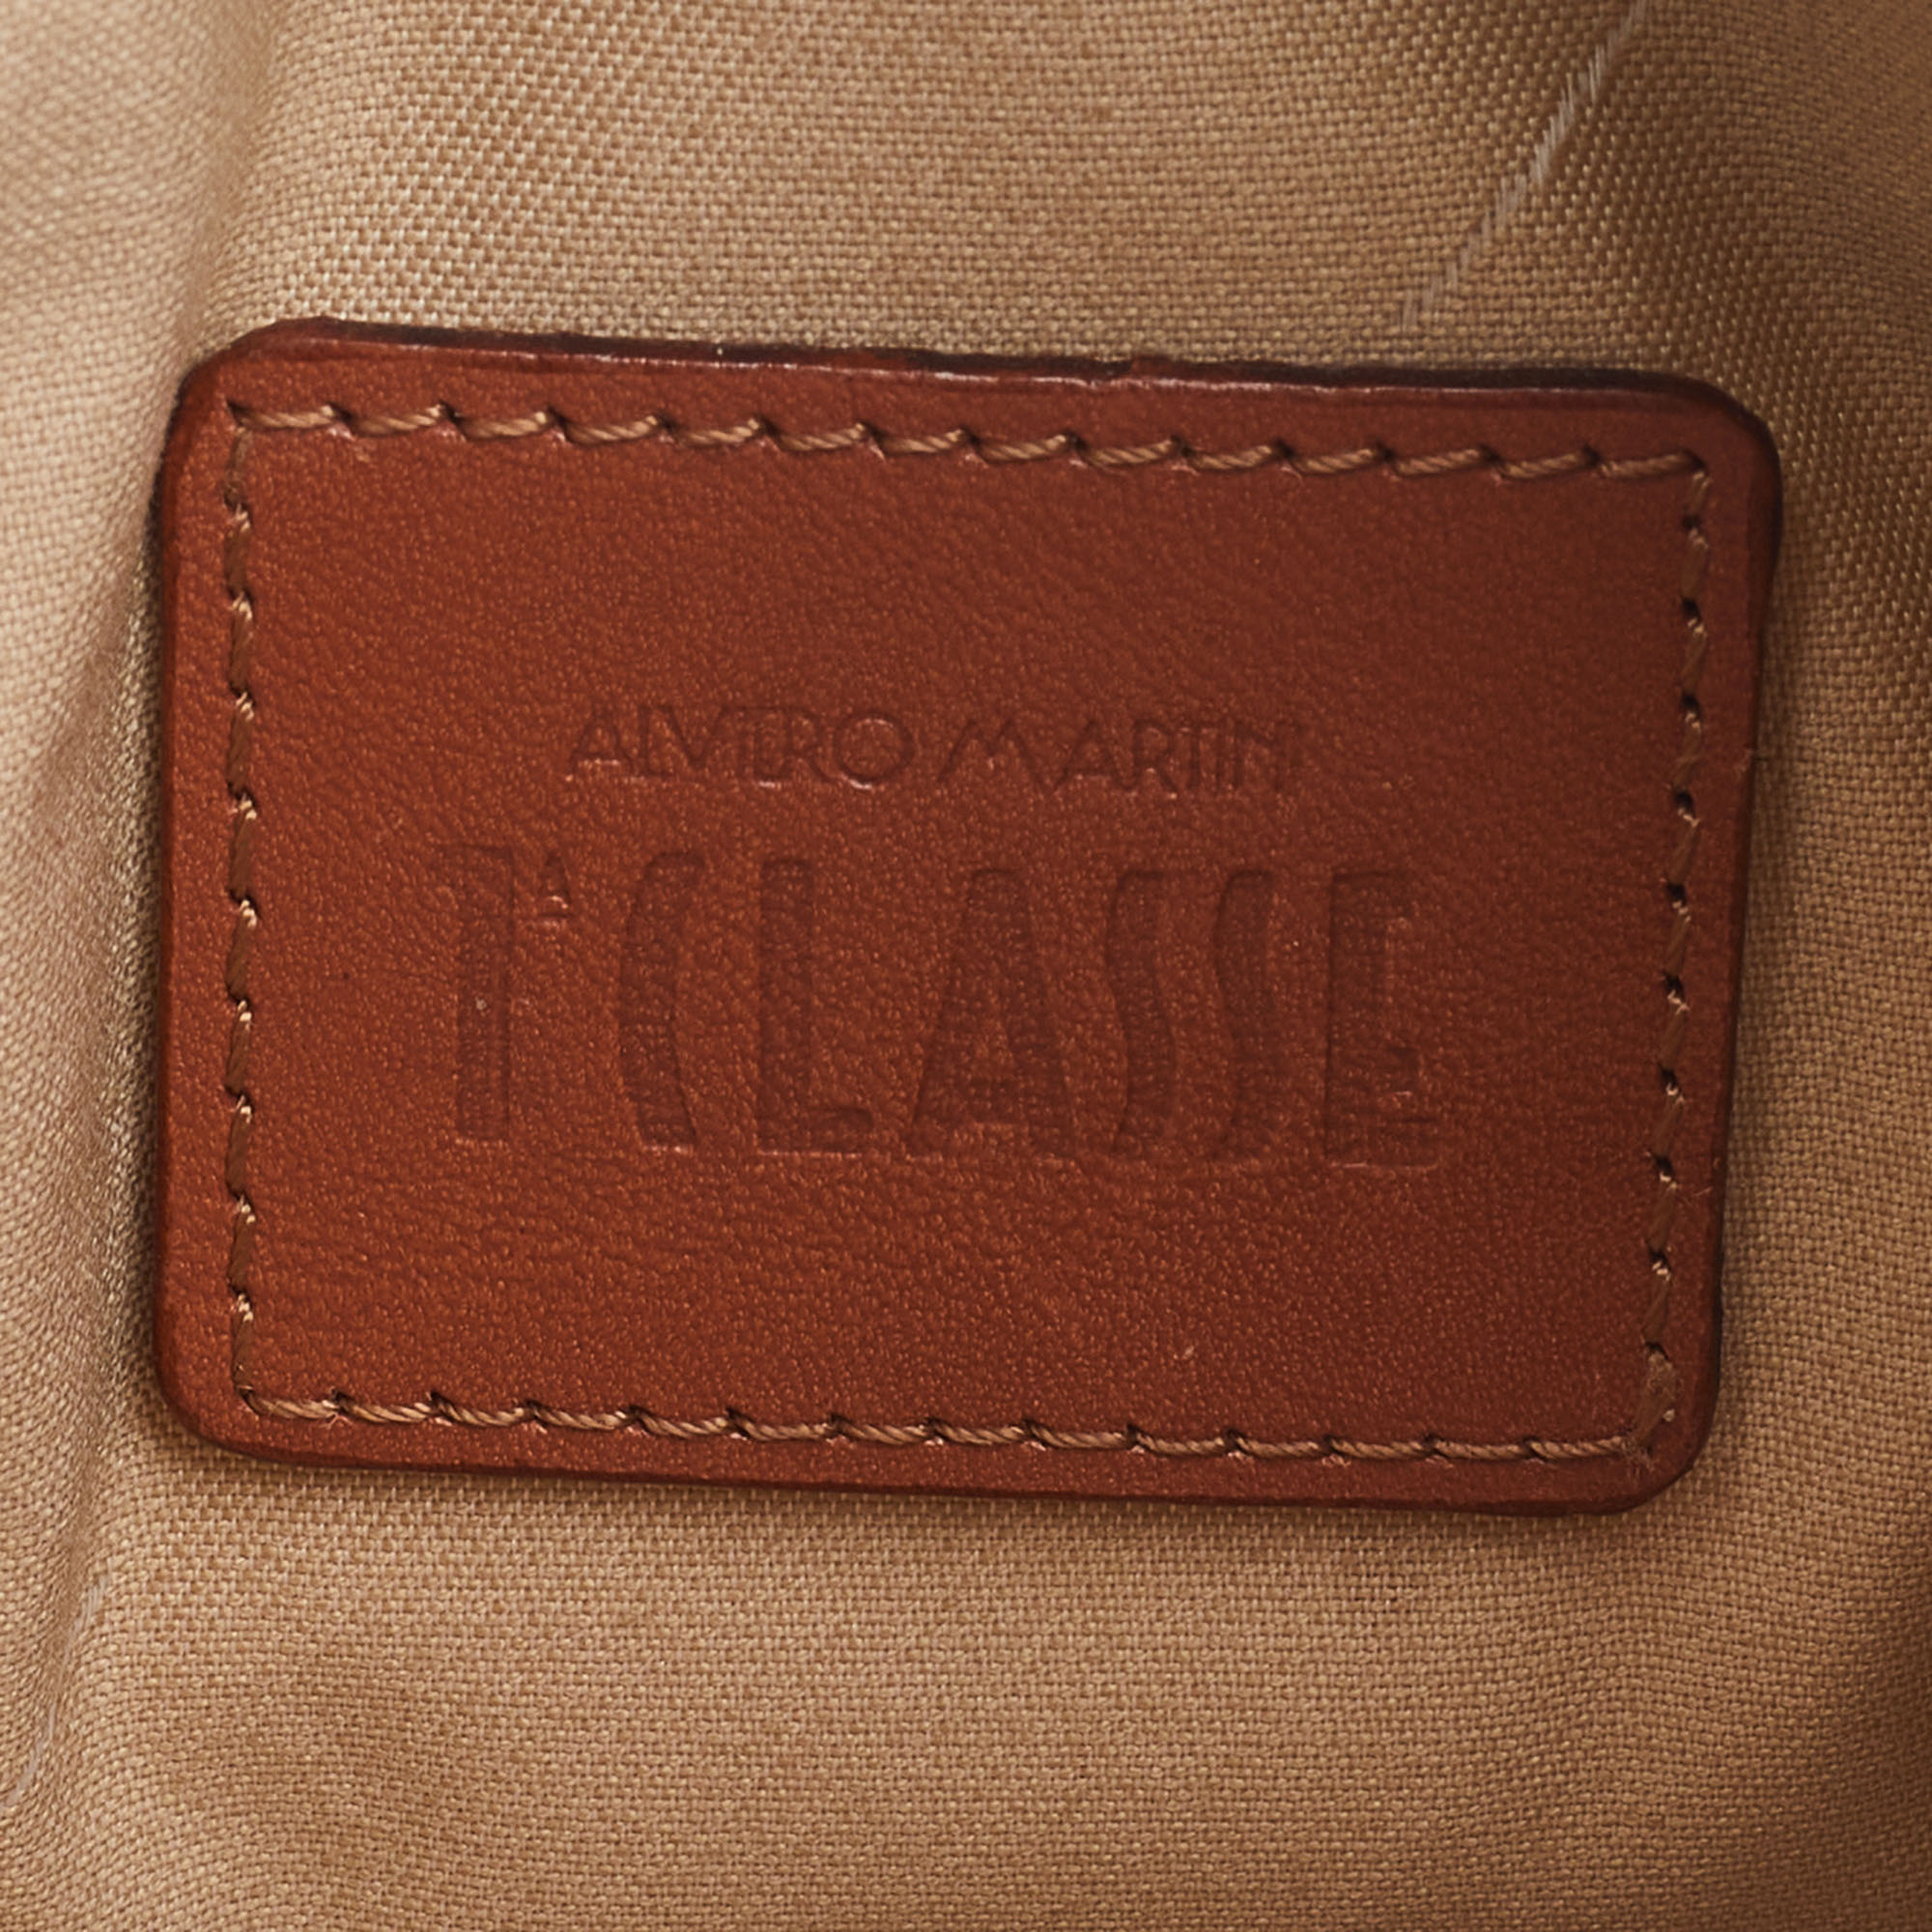 Alviero Martini 1A Classe Coated Canvas And Leather Zip Crossbody Bag